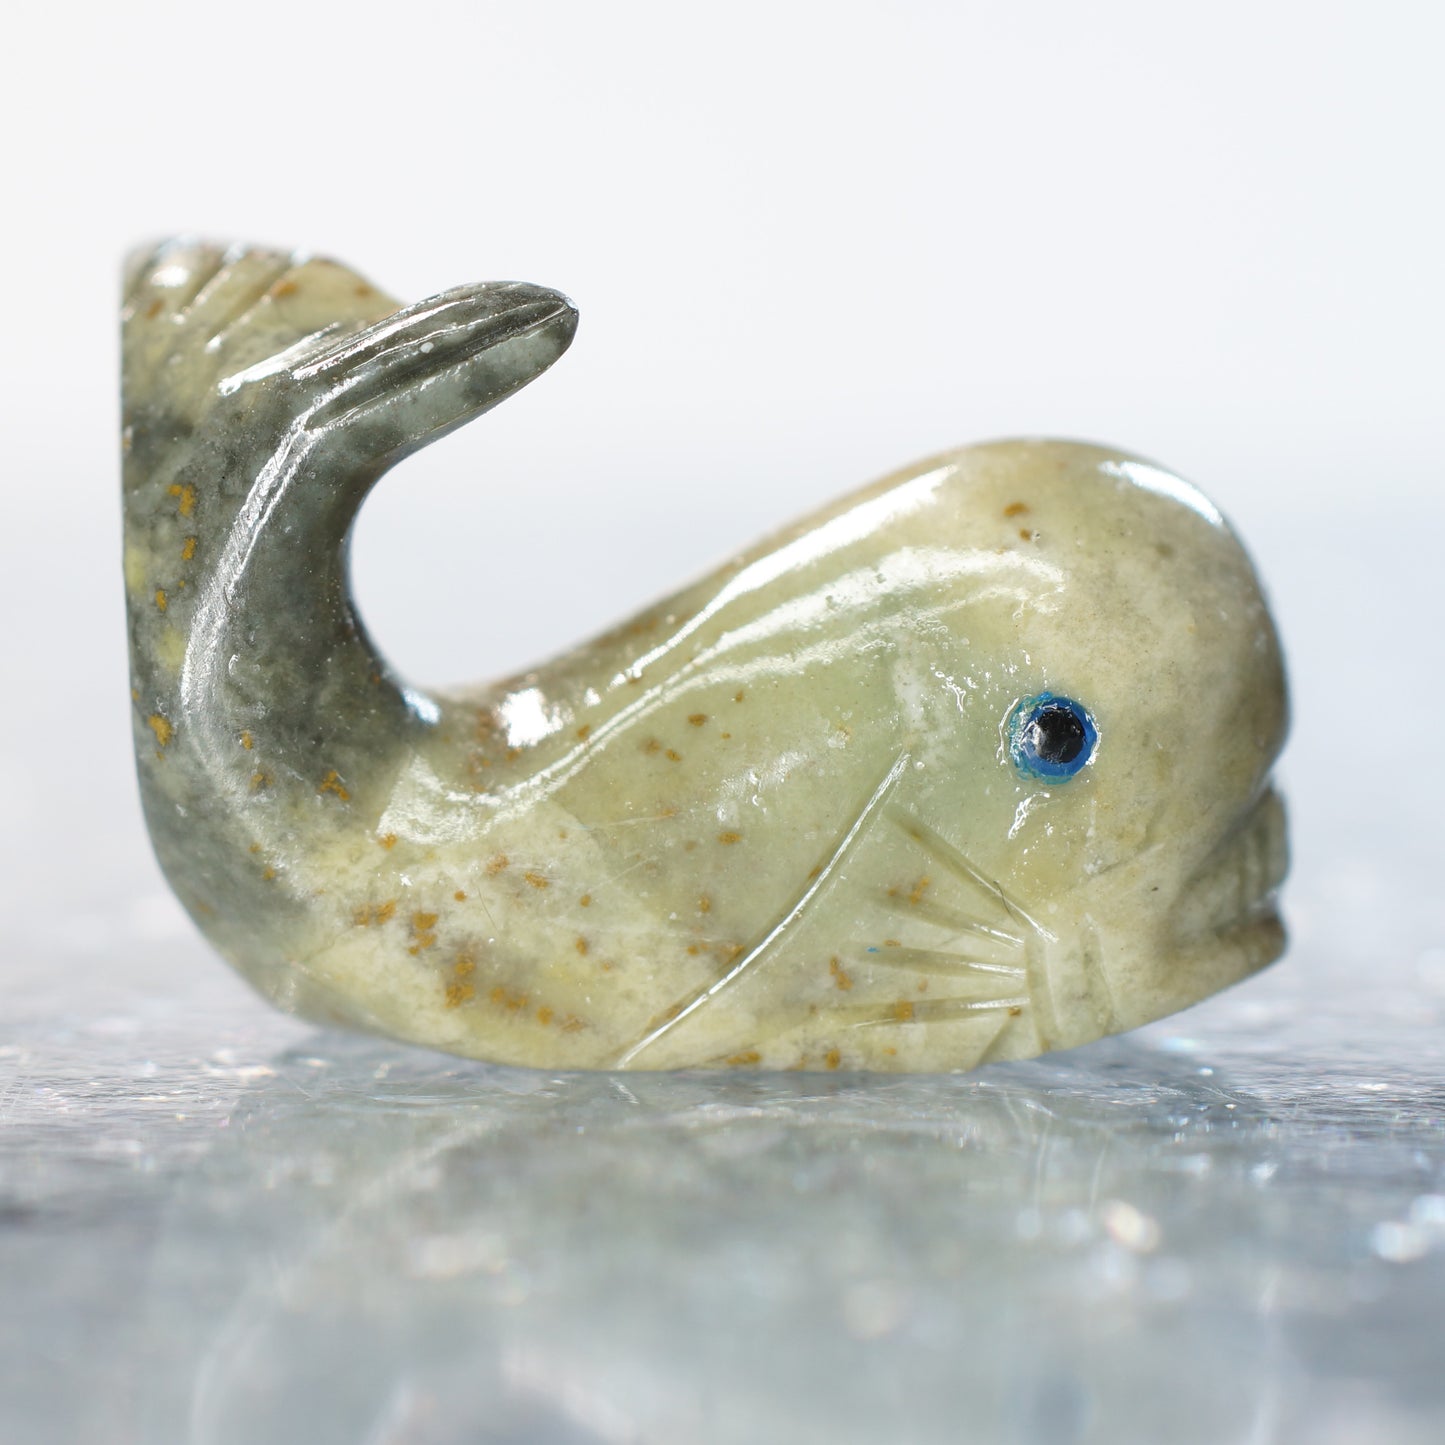 Whale - Soapstone Carving